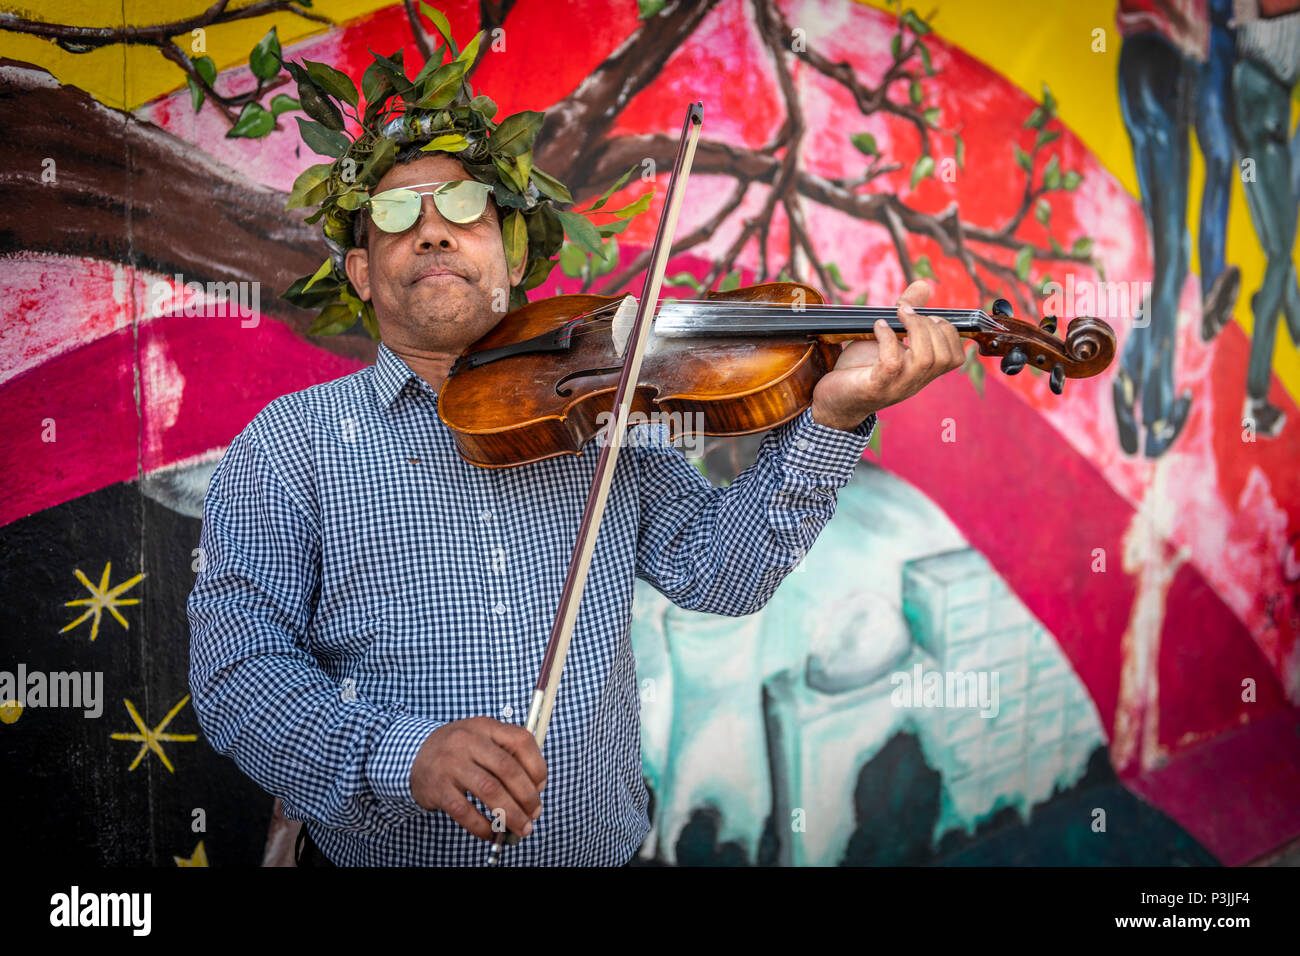 A busker entertains the tourists at the site of the Berlin Wall in former East Germany. Stock Photo